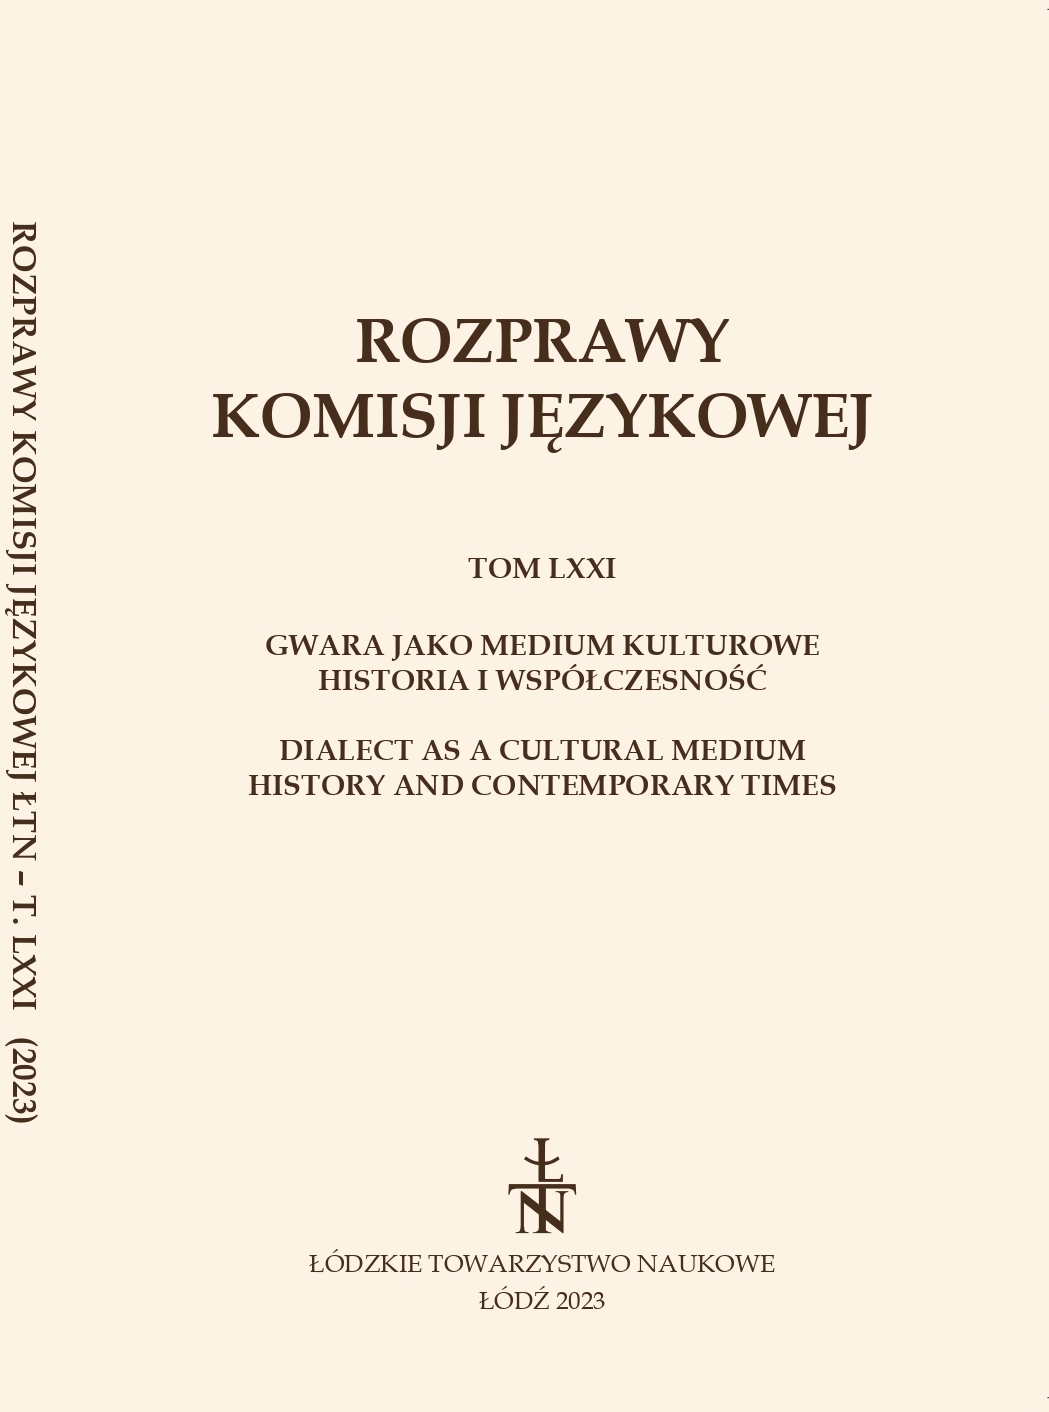 FOLK VOCABULARY AS A DERIVATIONAL BASIS OF 19TH CENTURY
SURNAMES IN PIOTRKÓW TRYBUNALSKI Cover Image